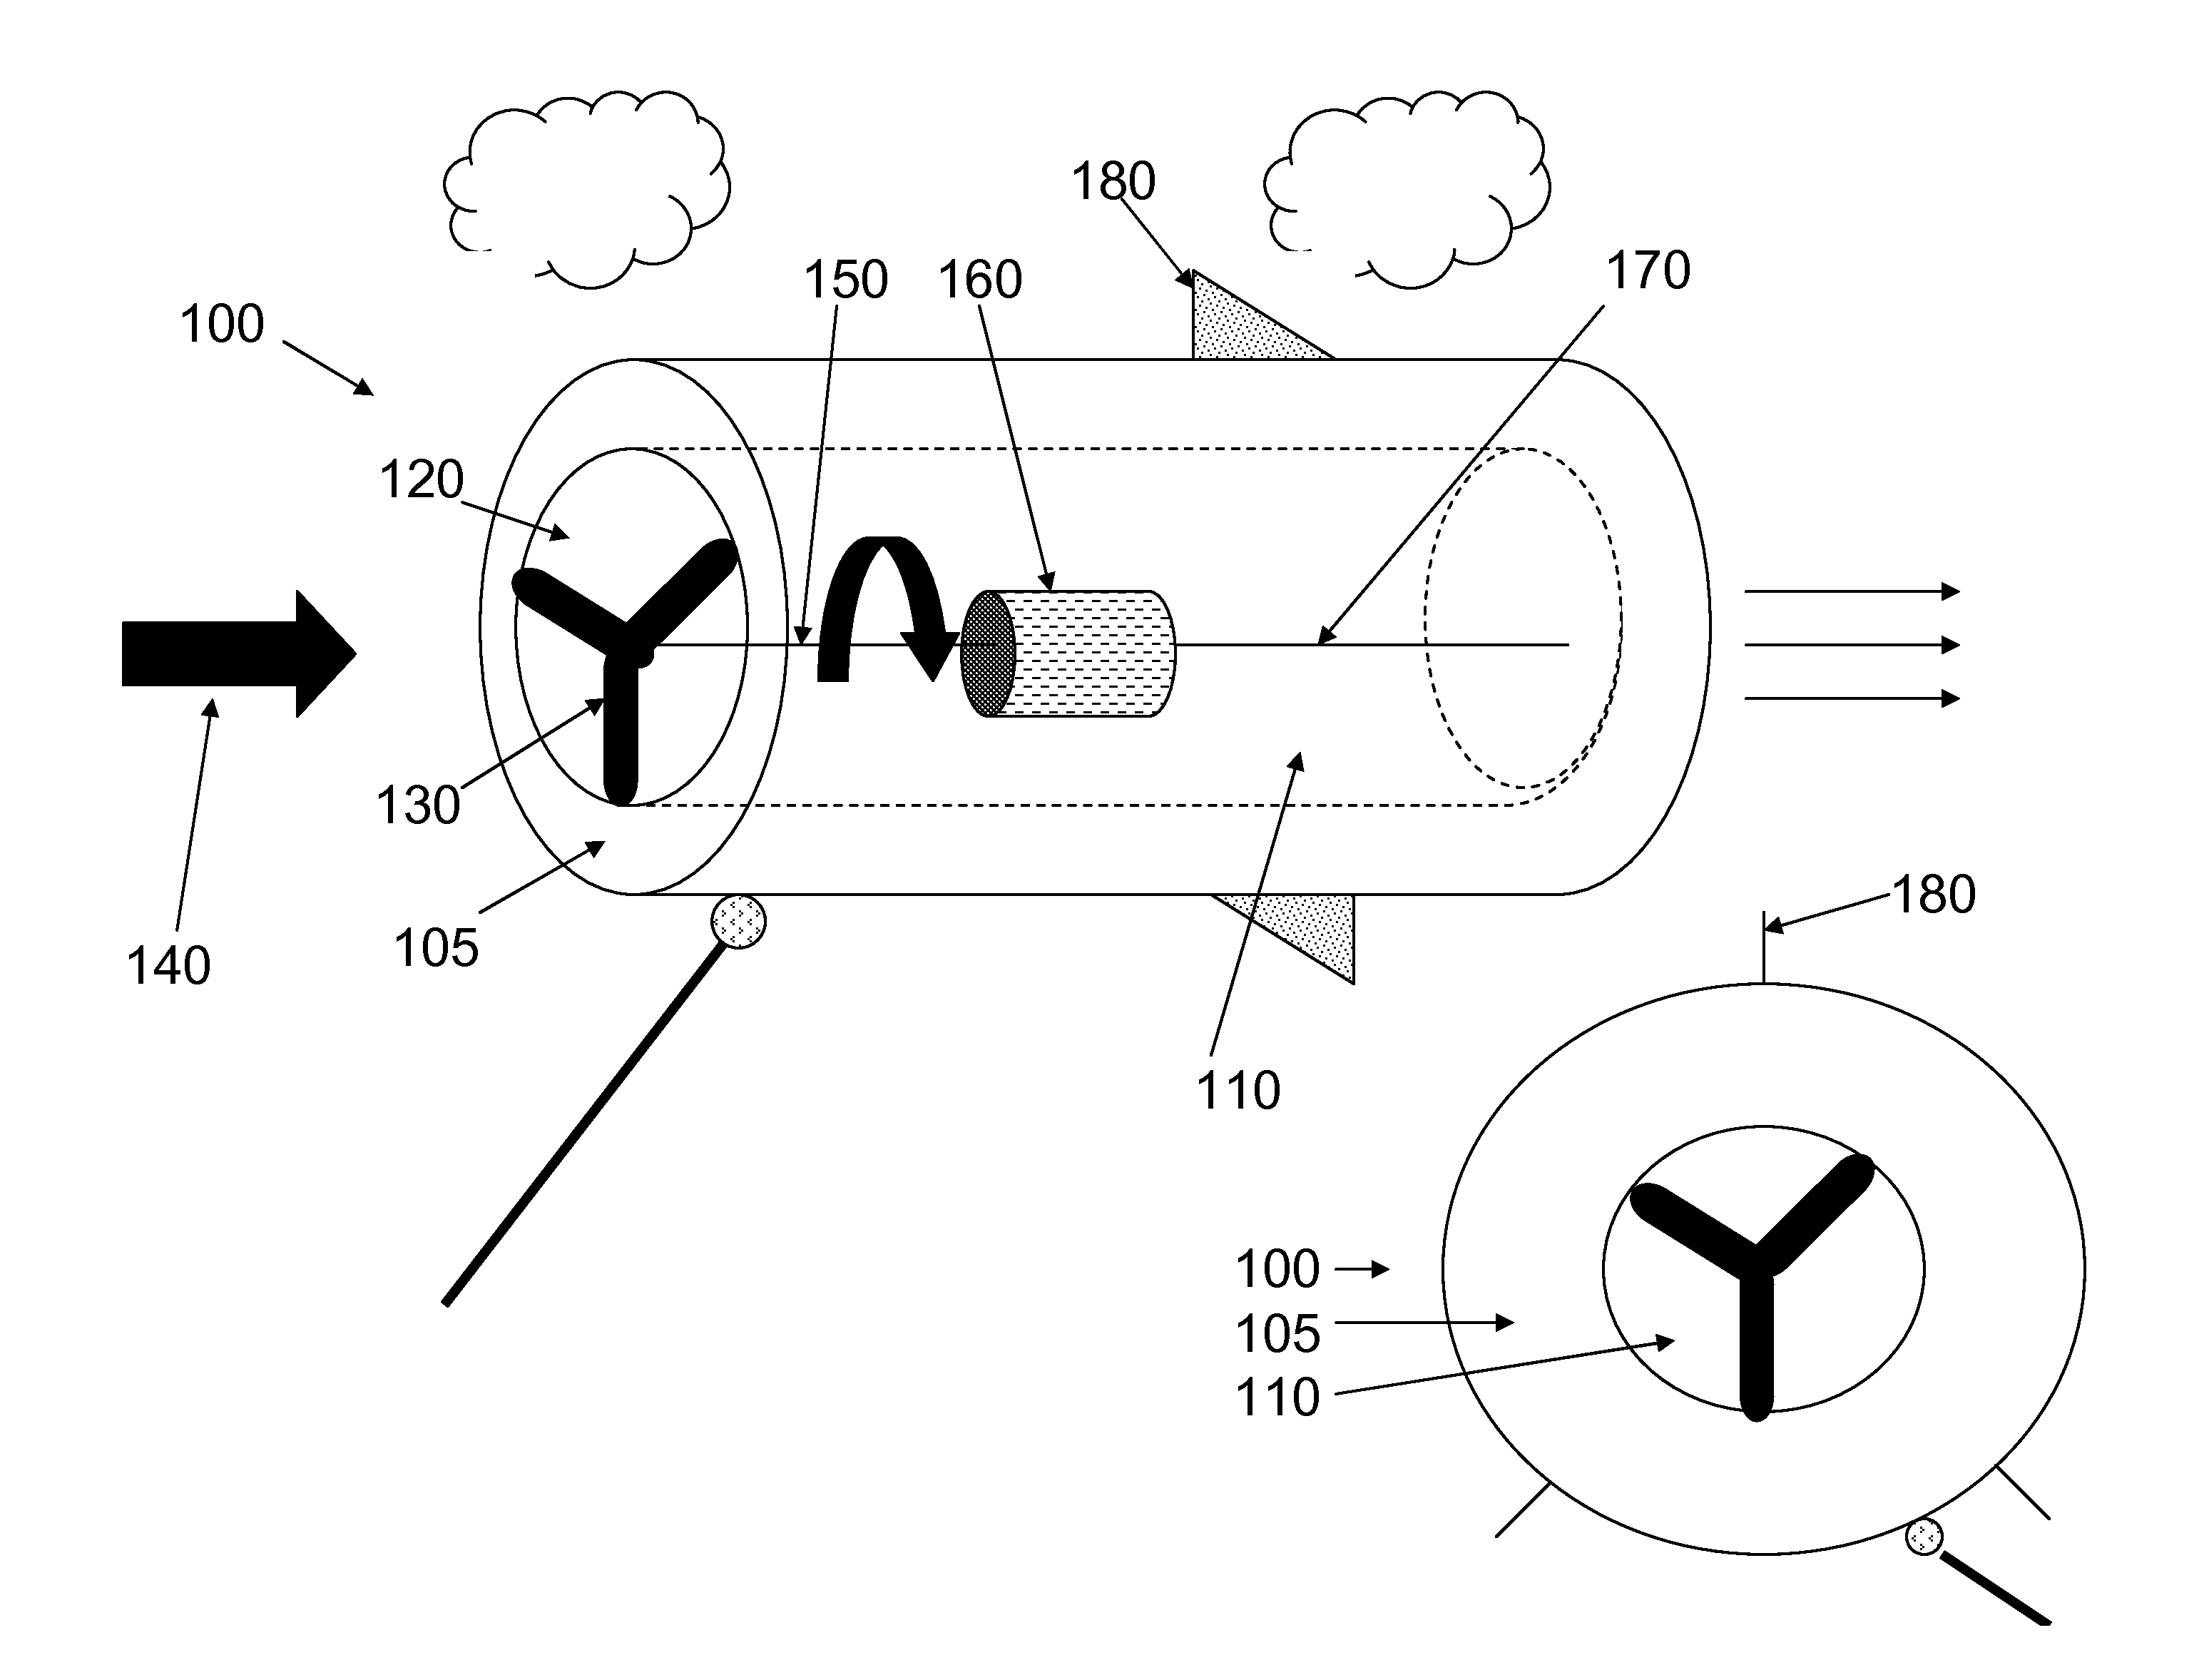 Methods and devices for generating electricity from high altitude wind sources